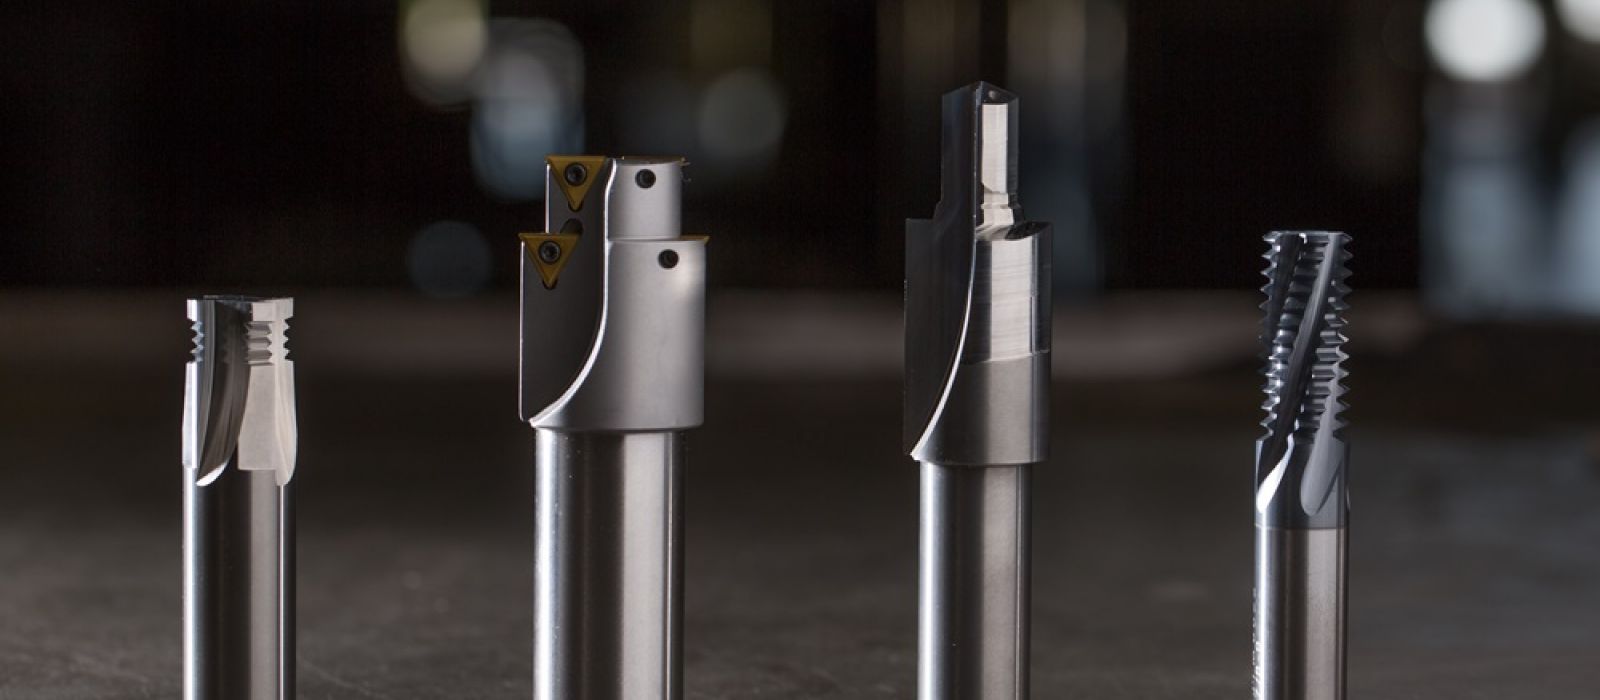 Industrial Cutting Tools: Need Industrial Cutting Tools? We’re ready to deliver what you need.